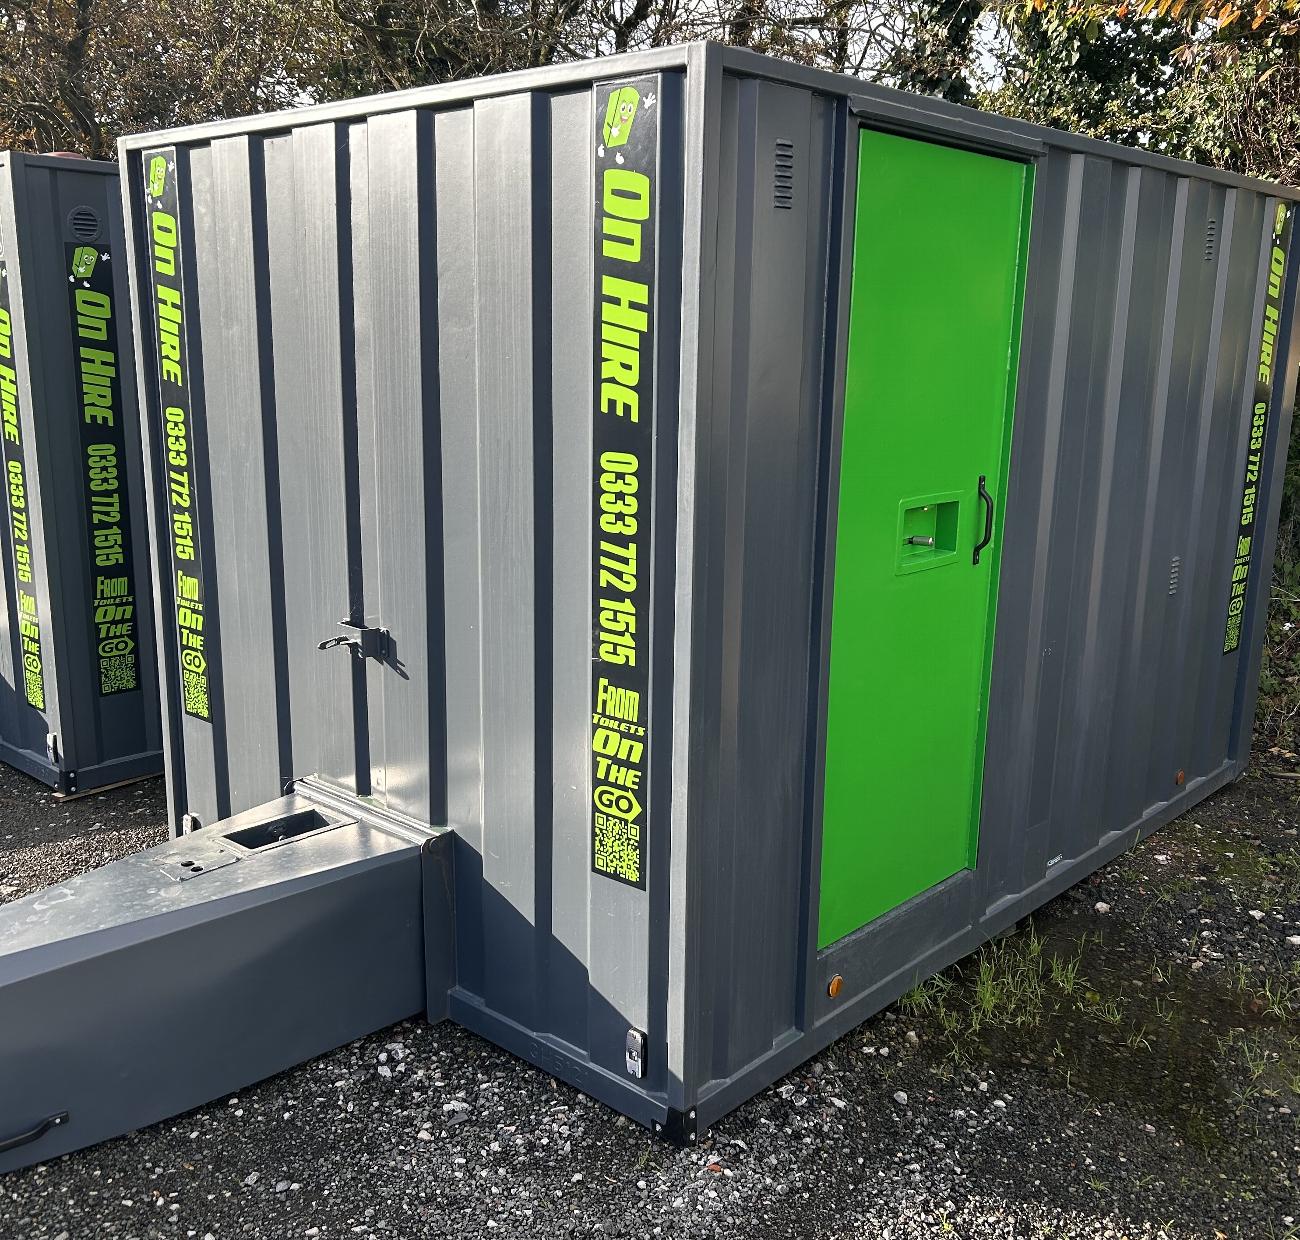 Gallery | Portable Toilet Loo Hire Rental Company in North West uk and Manchester gallery image 27